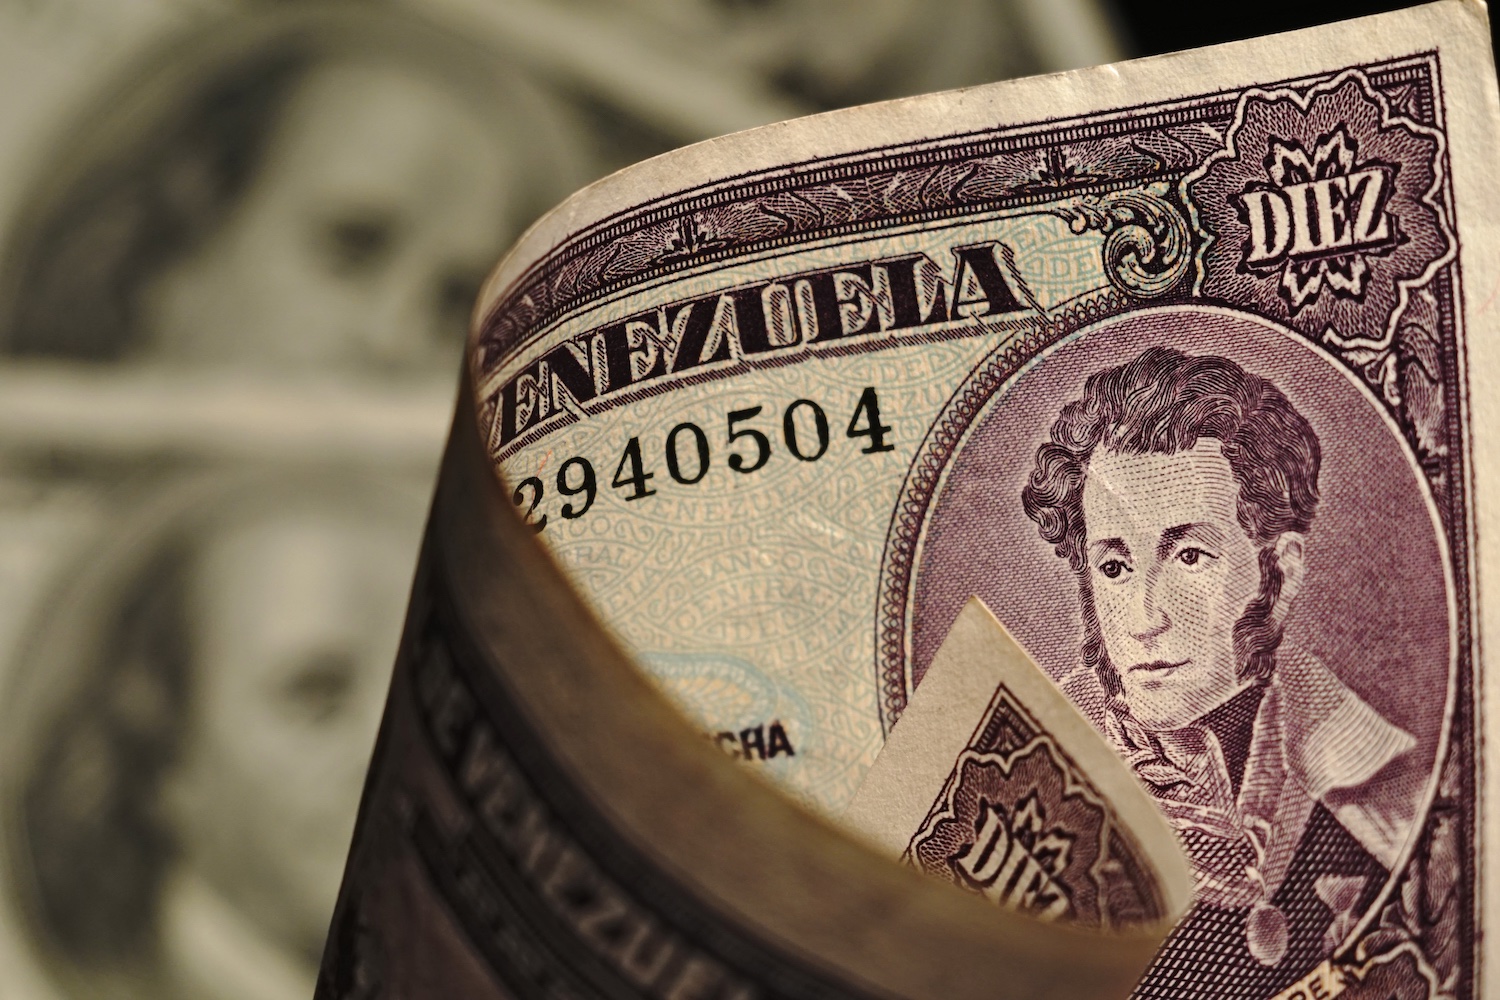 Venezuelans-look-to-crypto-dollars-for-financial-security